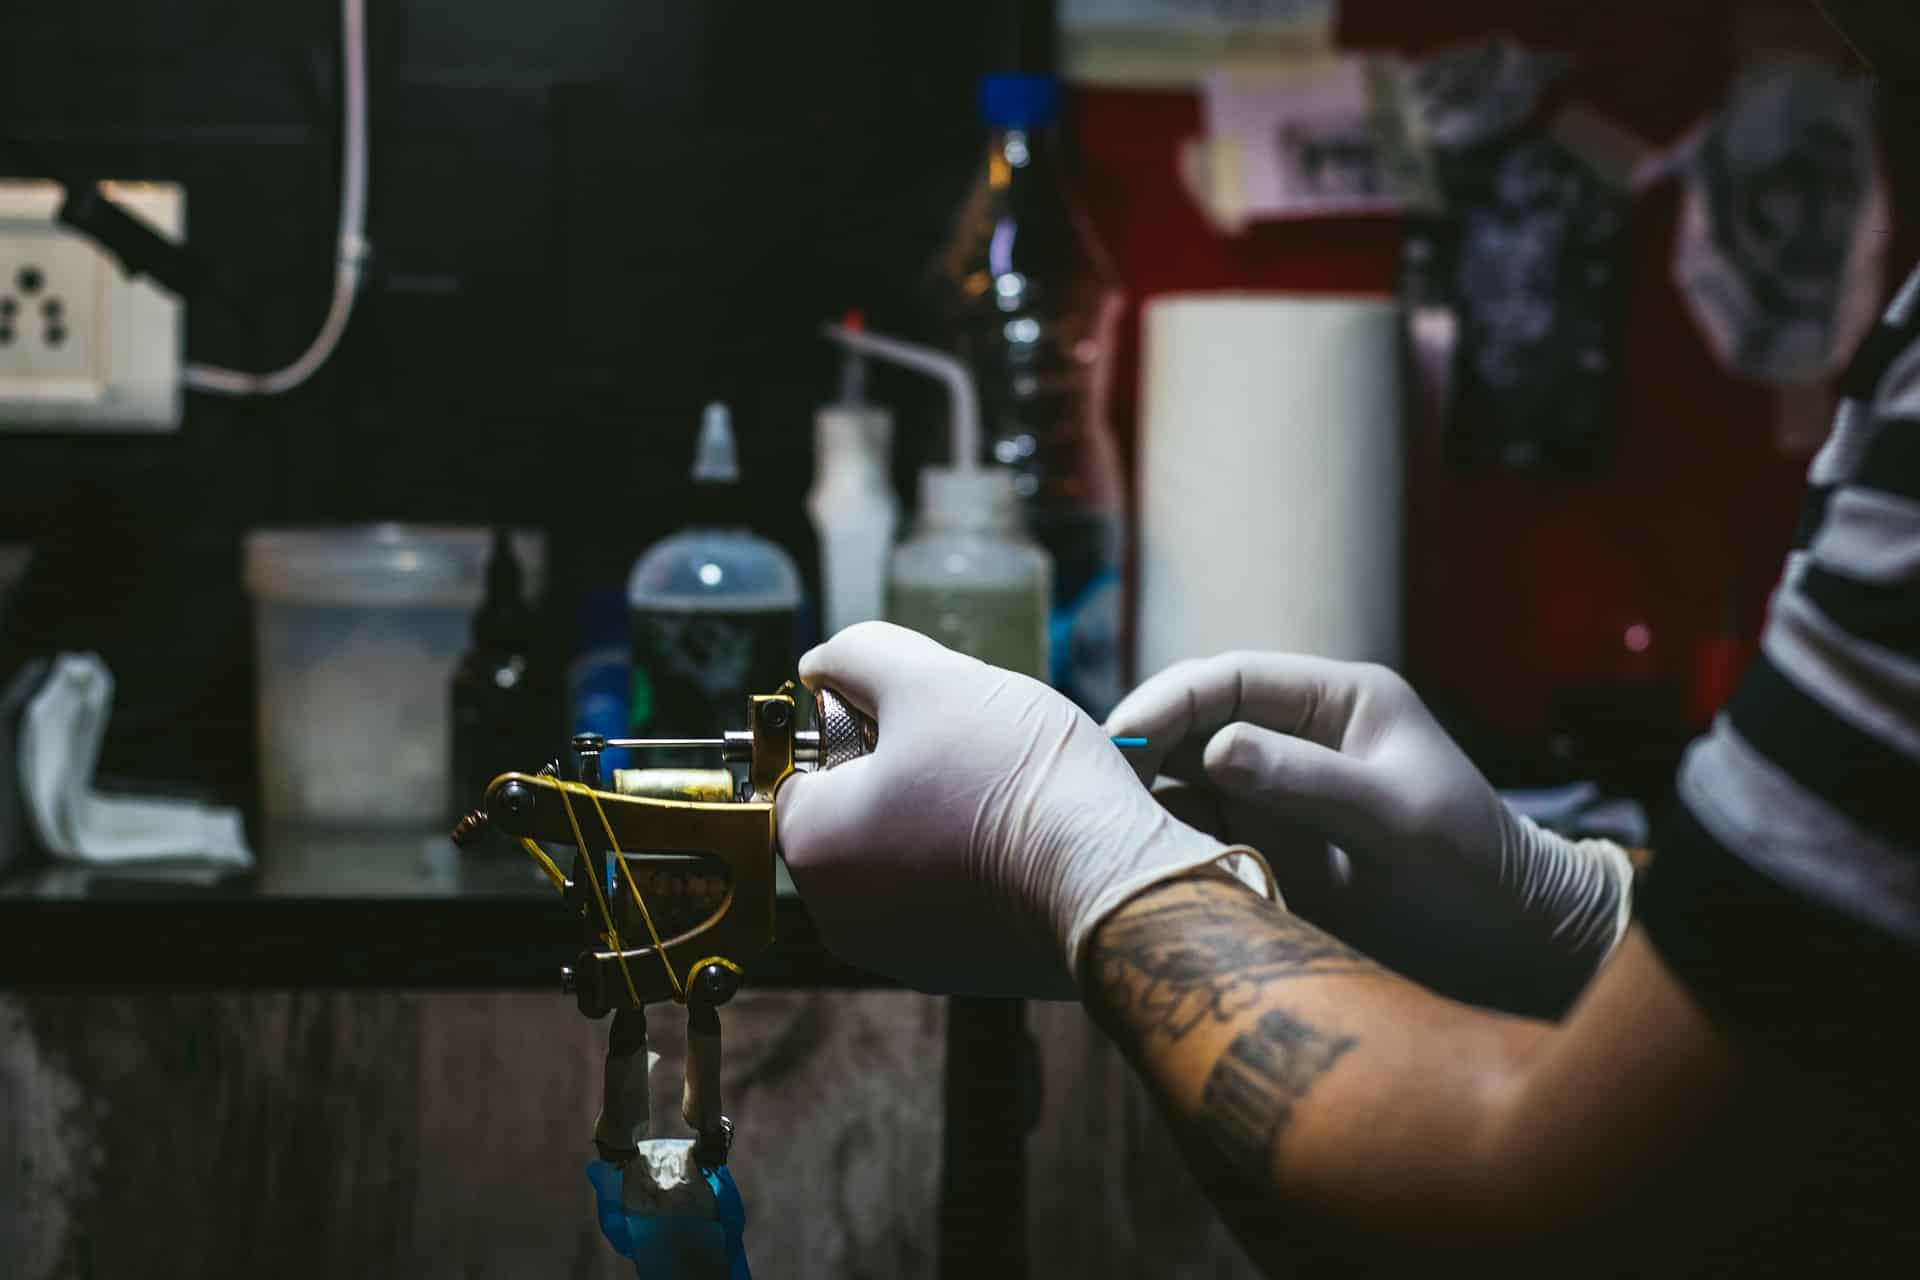 Tattoos increase risk of blood cancer by 21%, study finds